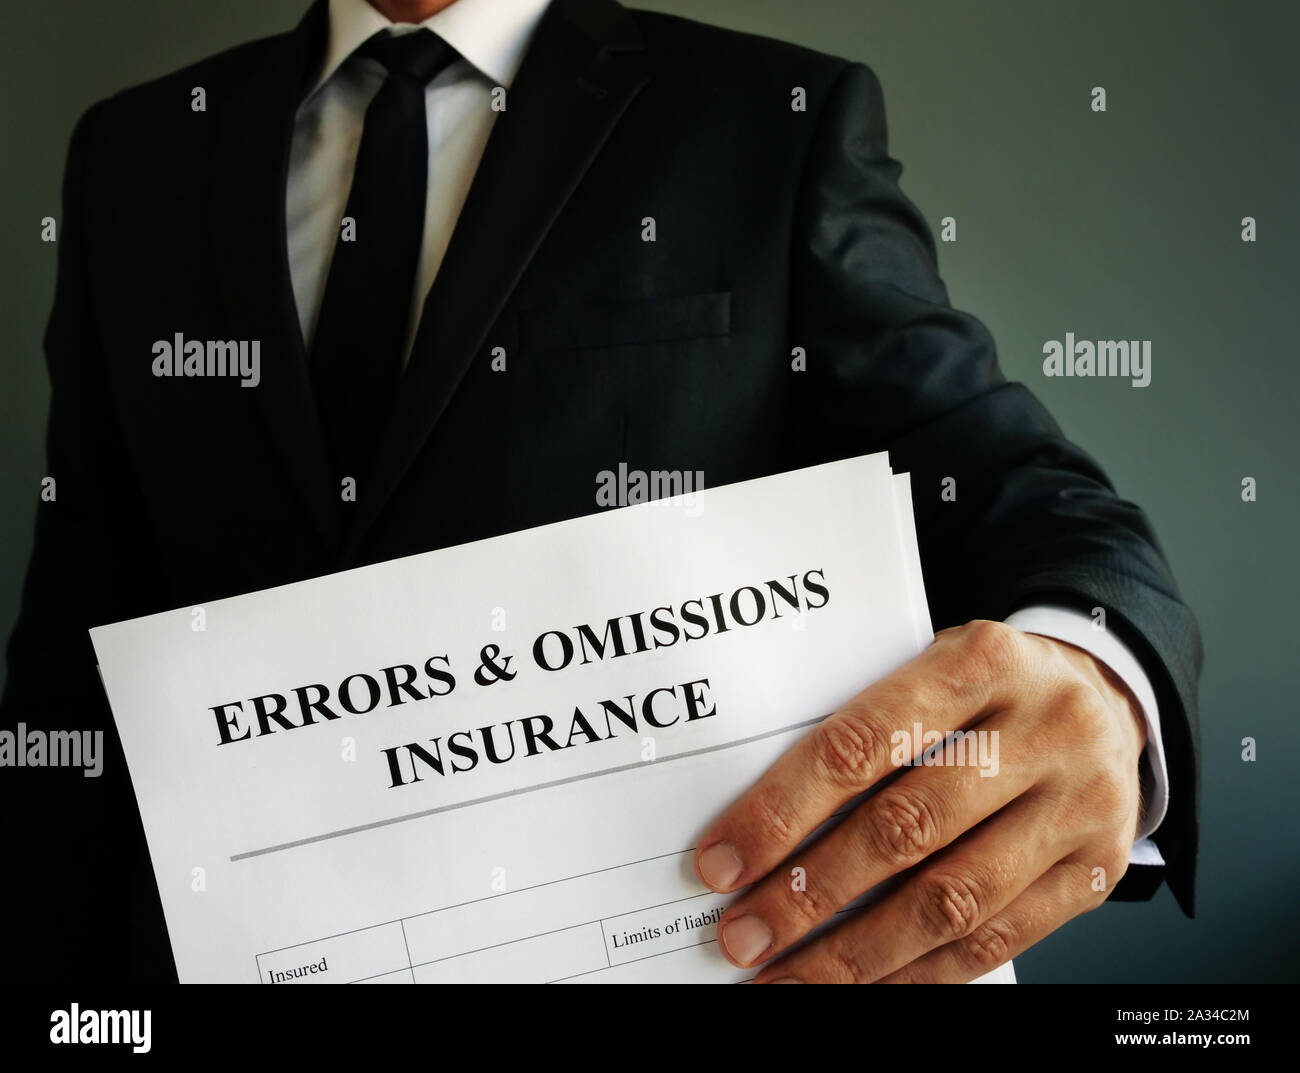 Errors and omissions E&O insurance or professional liability policy in the hands. Stock Photo